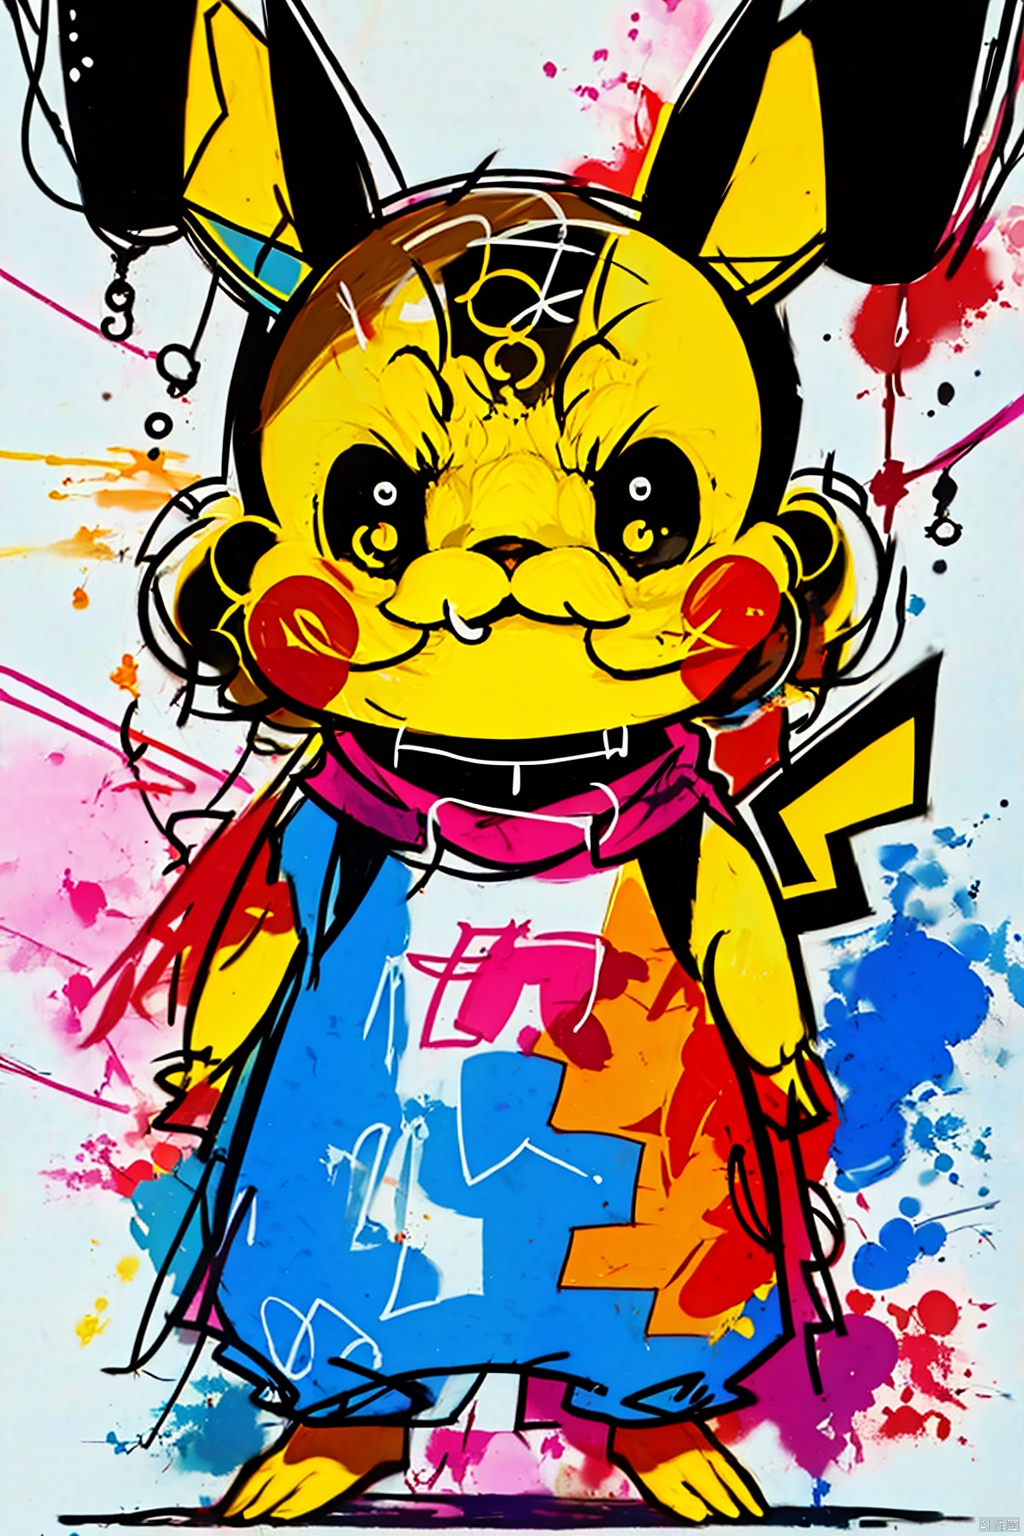  Pokemon,Pikachu,Clutteredlines,Colored spray paint, colored ink drops, Pikachu